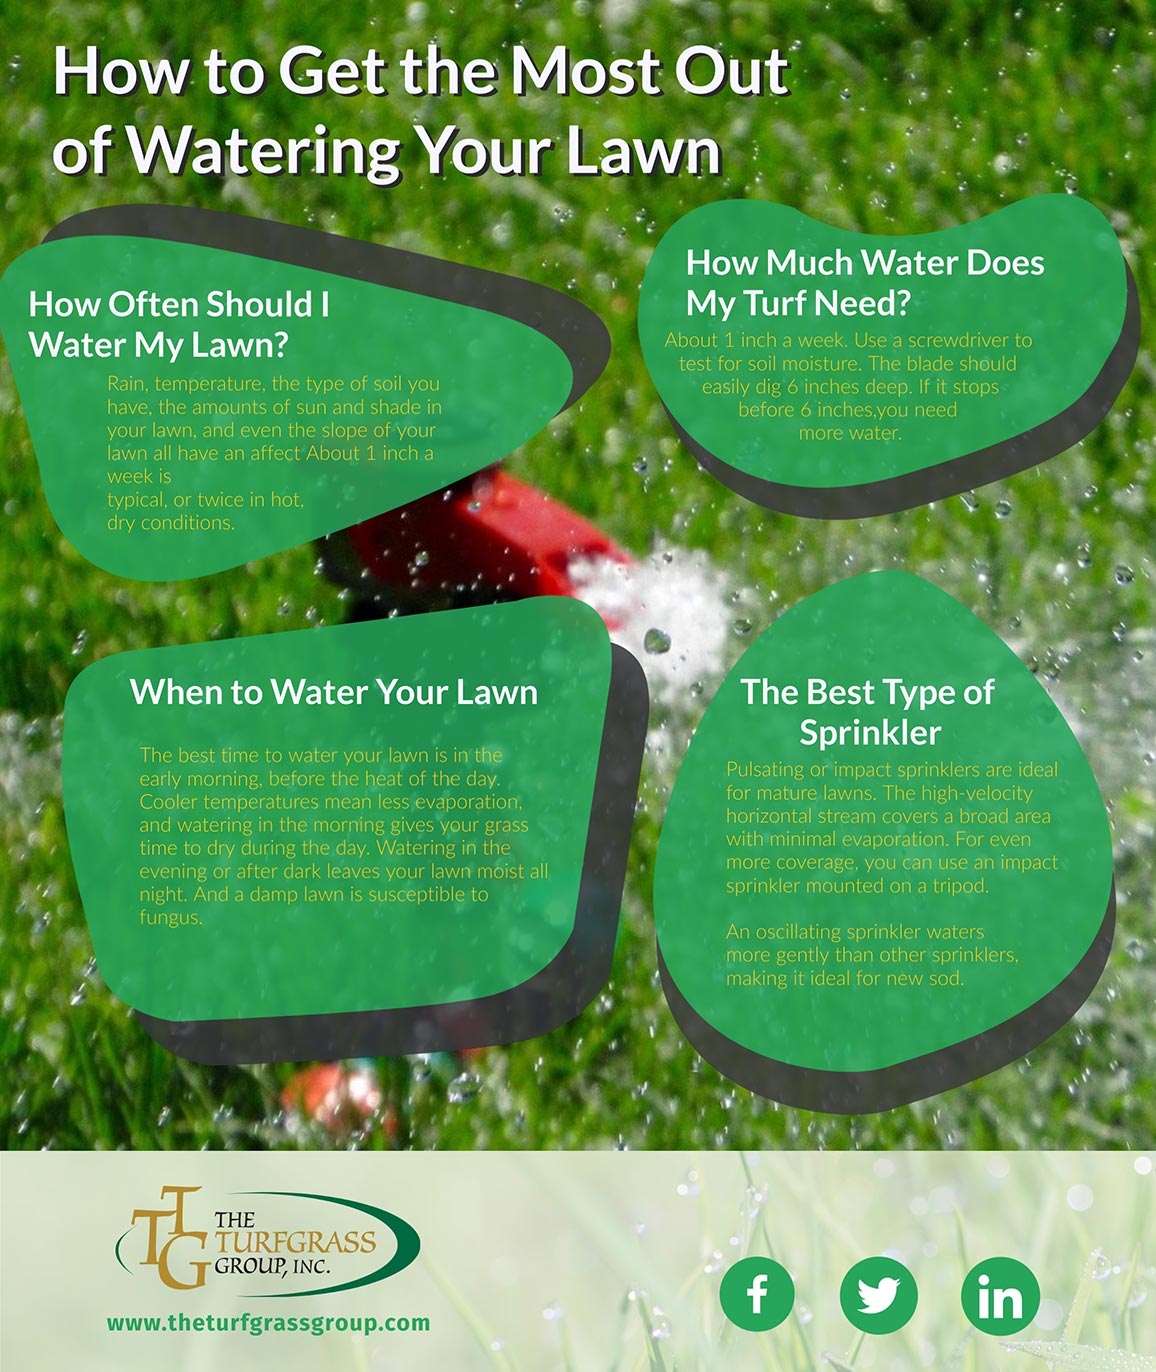 How to Get the Most Out of Watering Your Lawn [infographic]